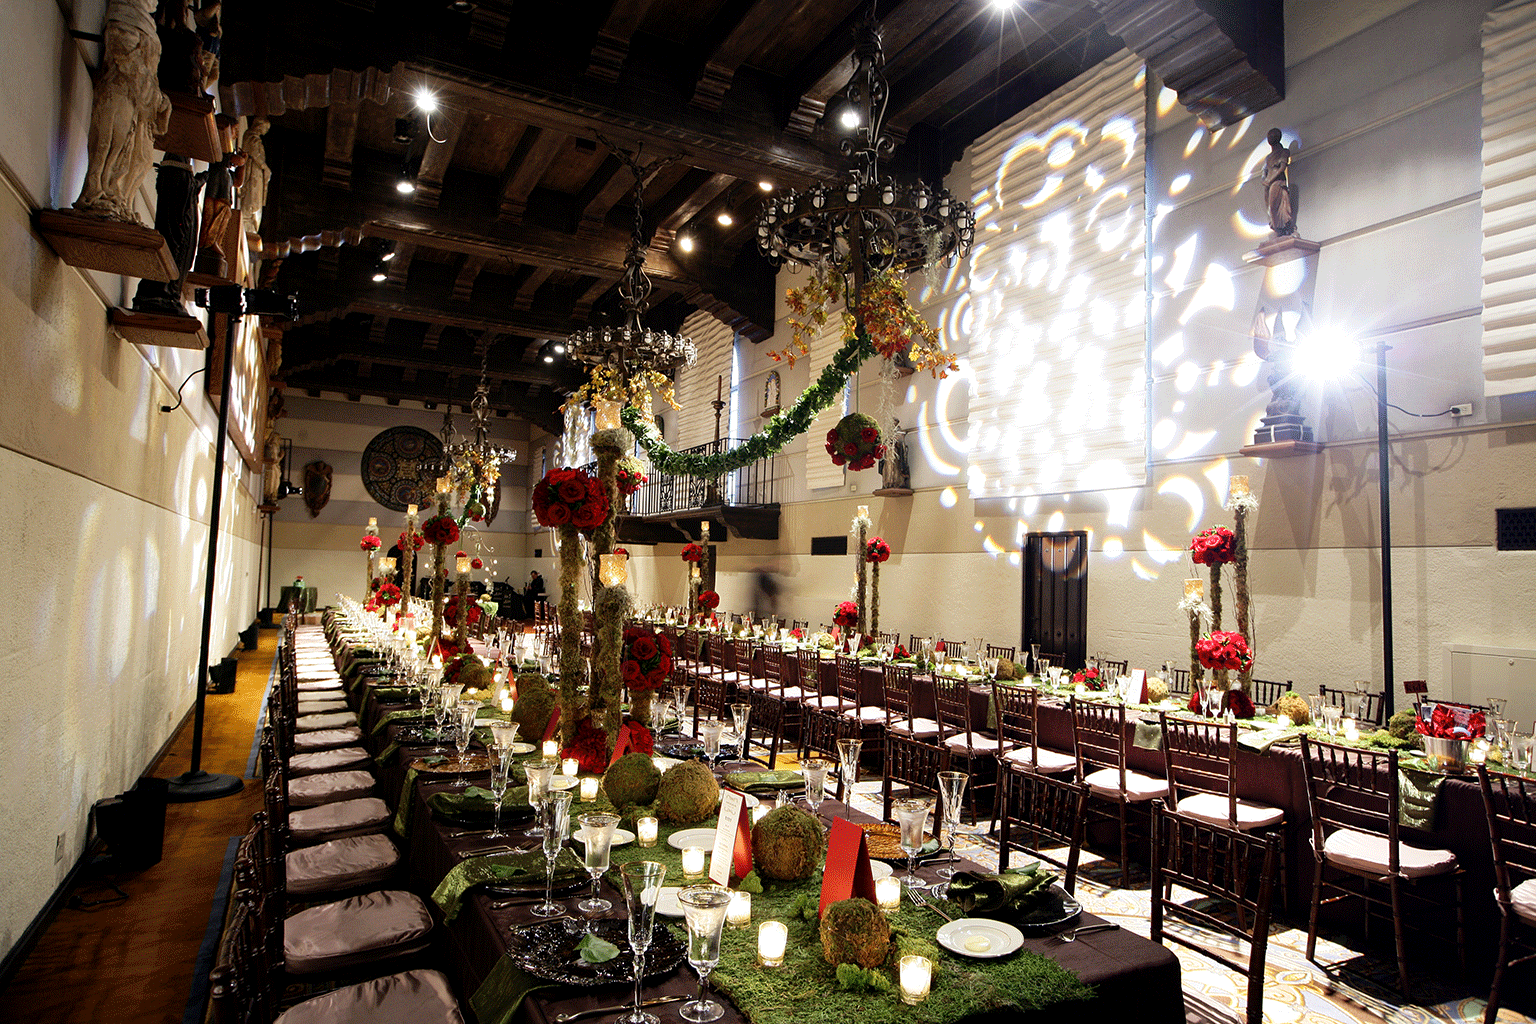 Decorated table in Galleria ballroom at Mission Inn Riverside